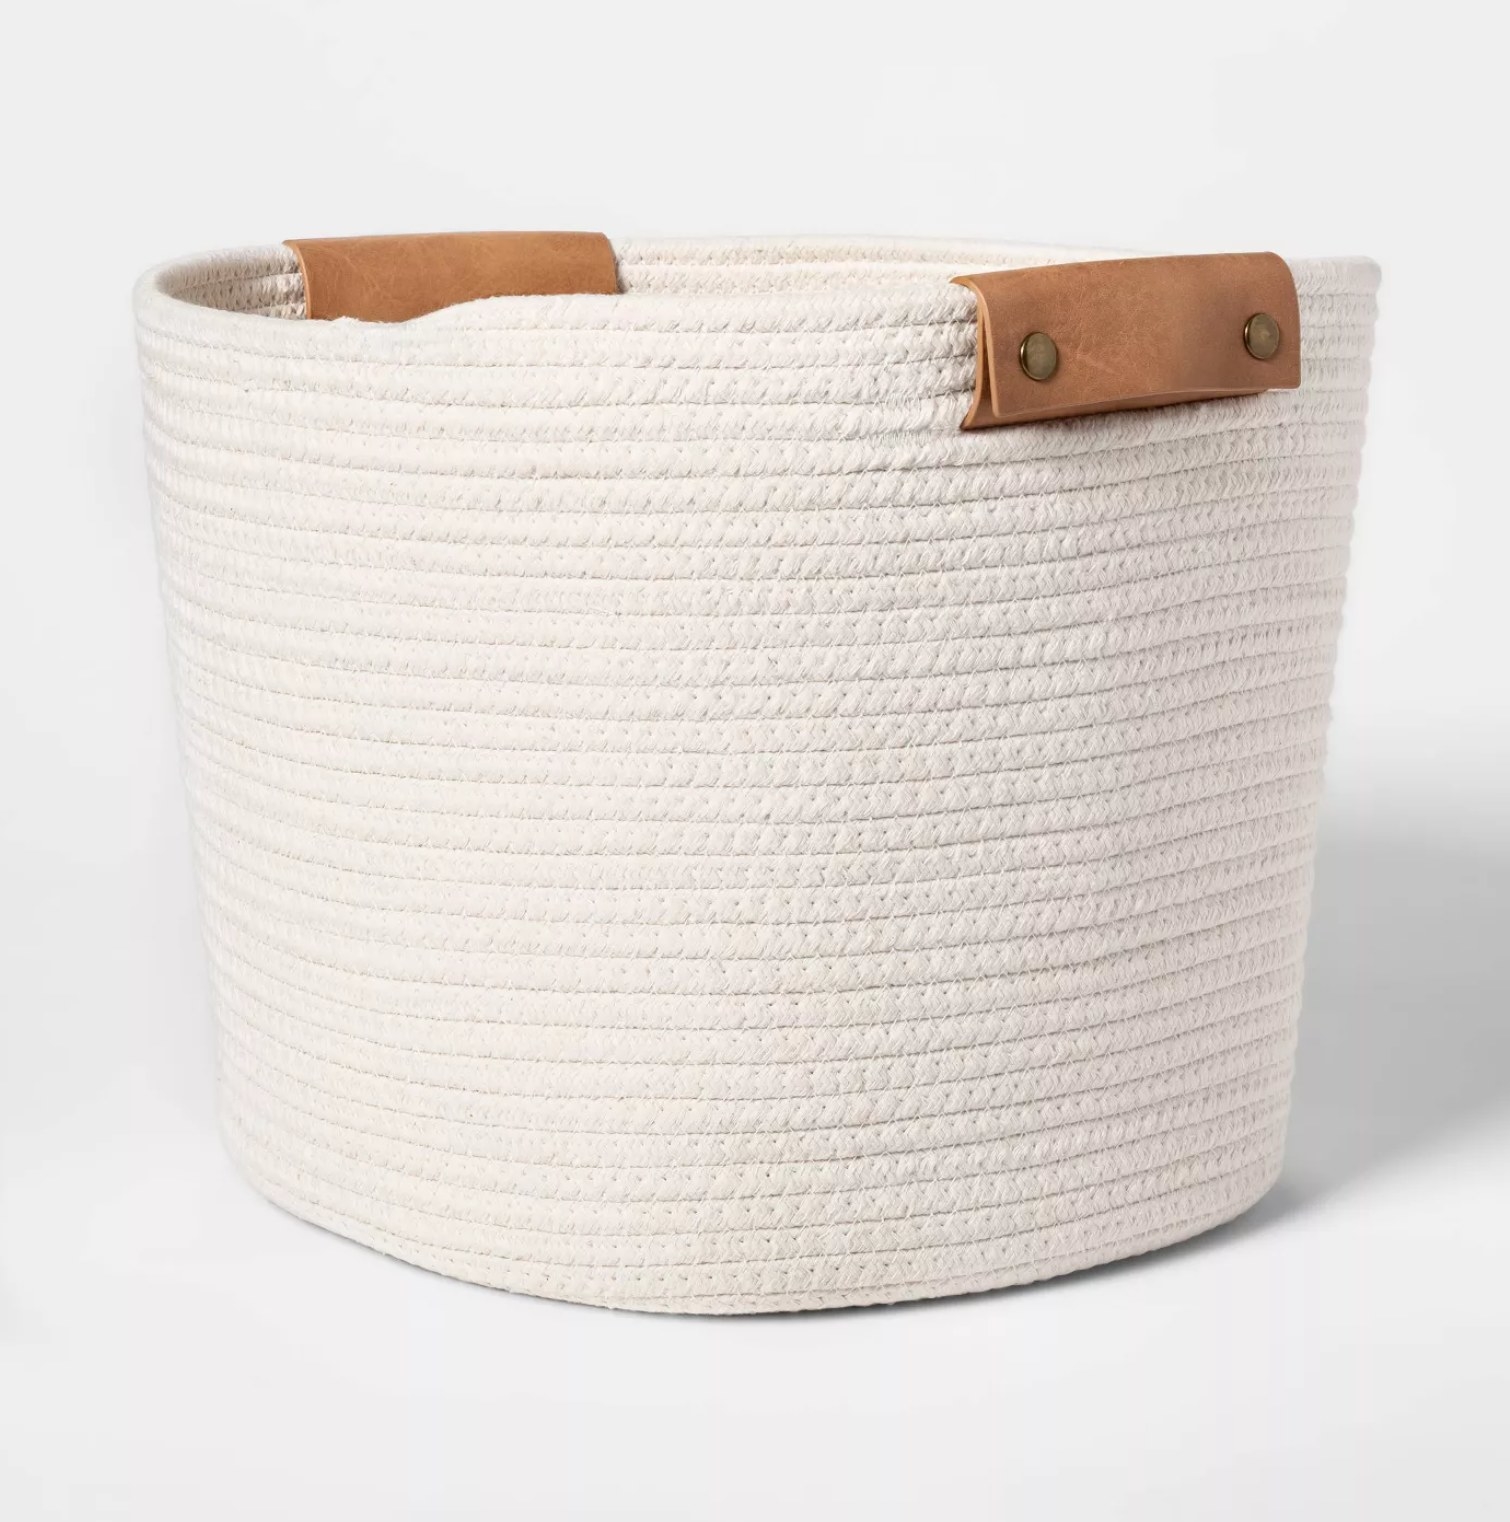 The white basket with brown leather-like details